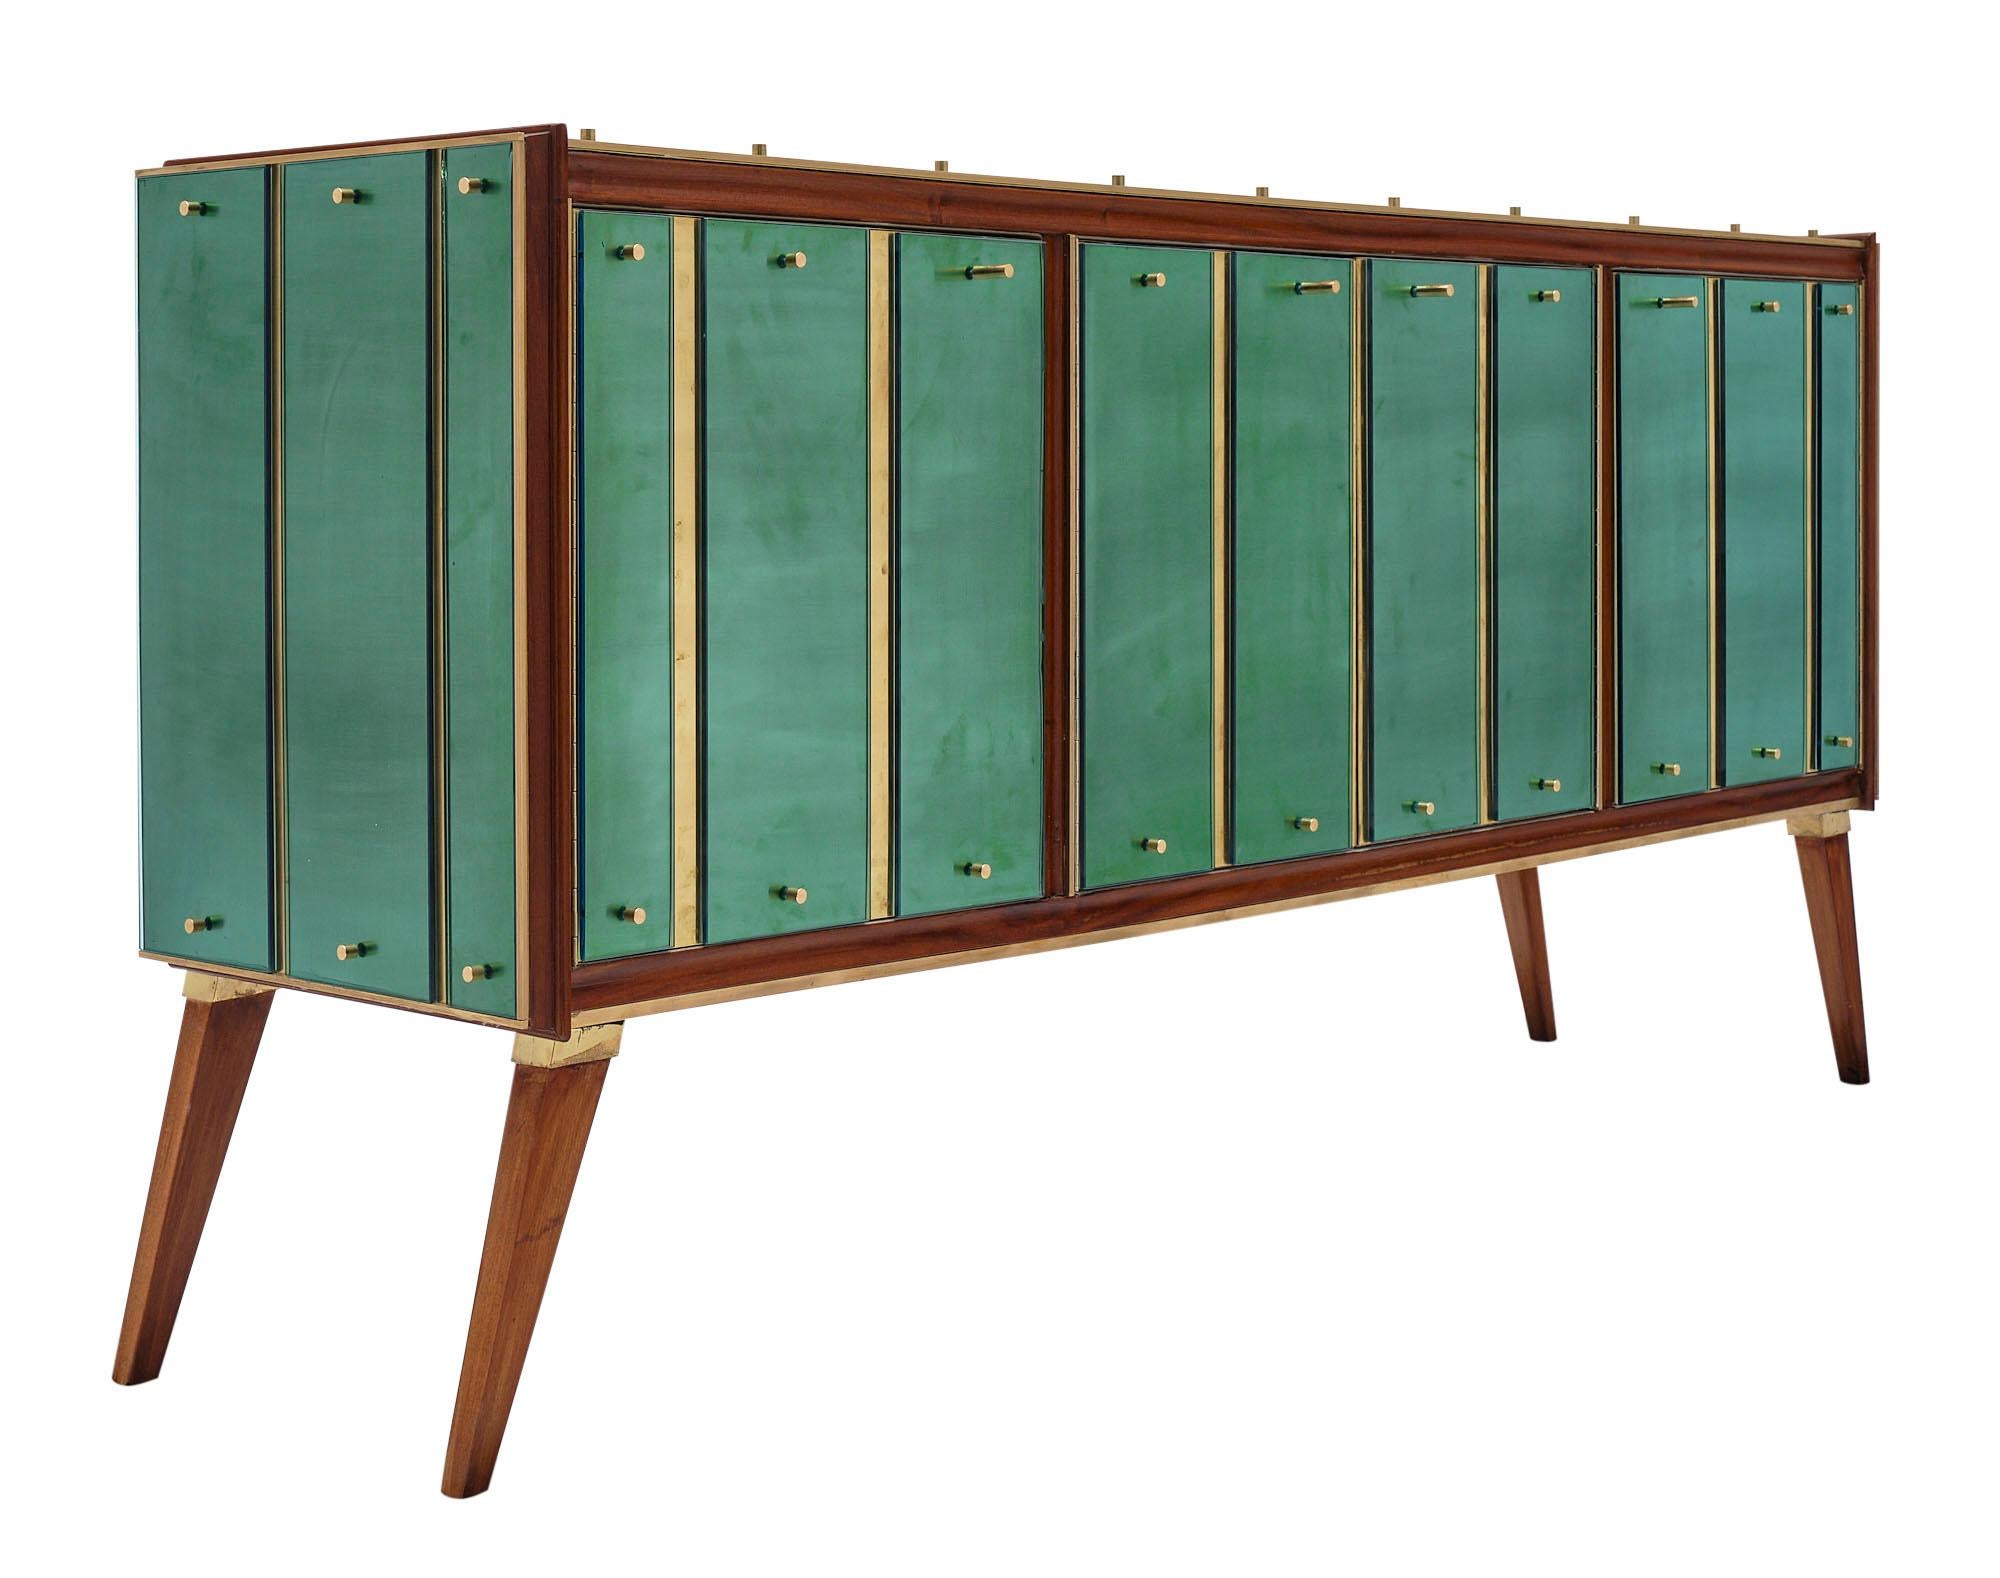 Buffet / enfilade from the Veneto region of Italy. This piece is made of walnut with four doors and flaring tapered legs. The credenza features a brass veneer covered with green slabs of glass maintained to the structure with solid brass spindles.